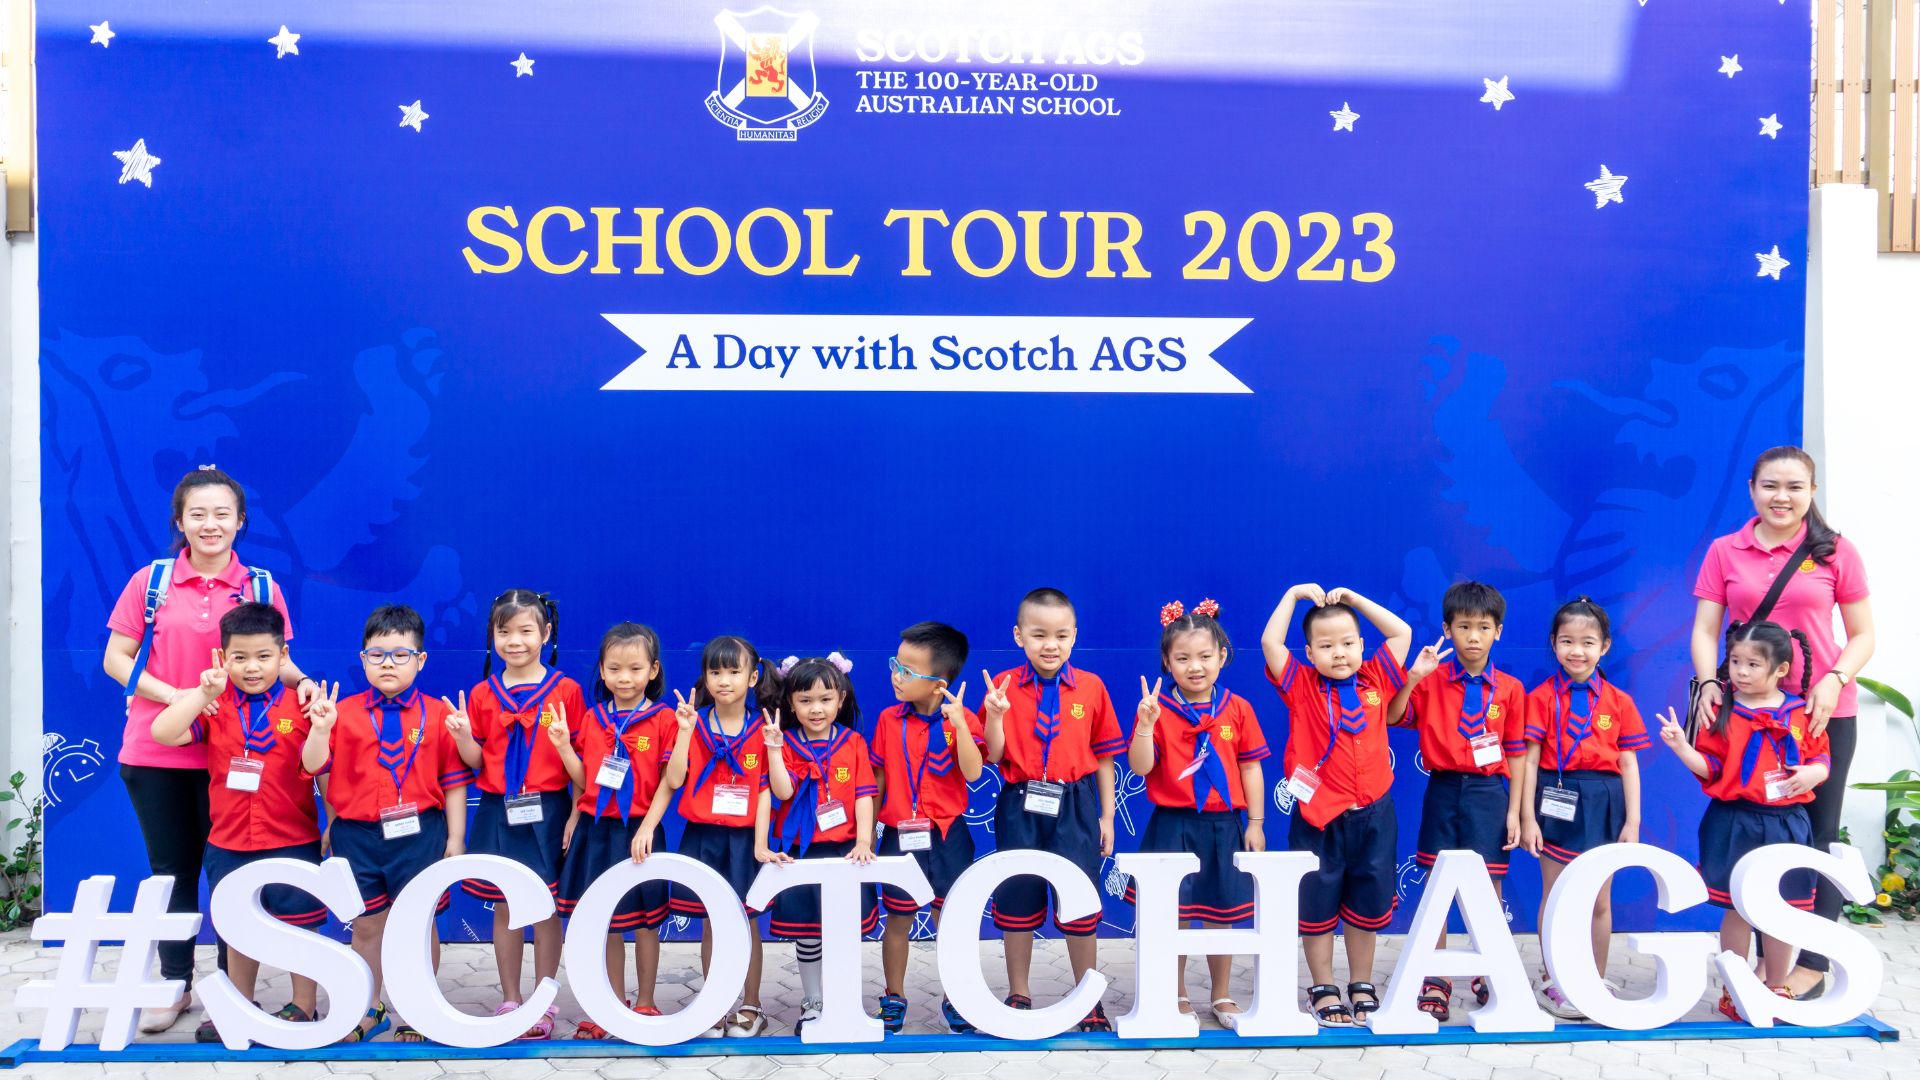 School tour 2023 - A day with Scotch AGS